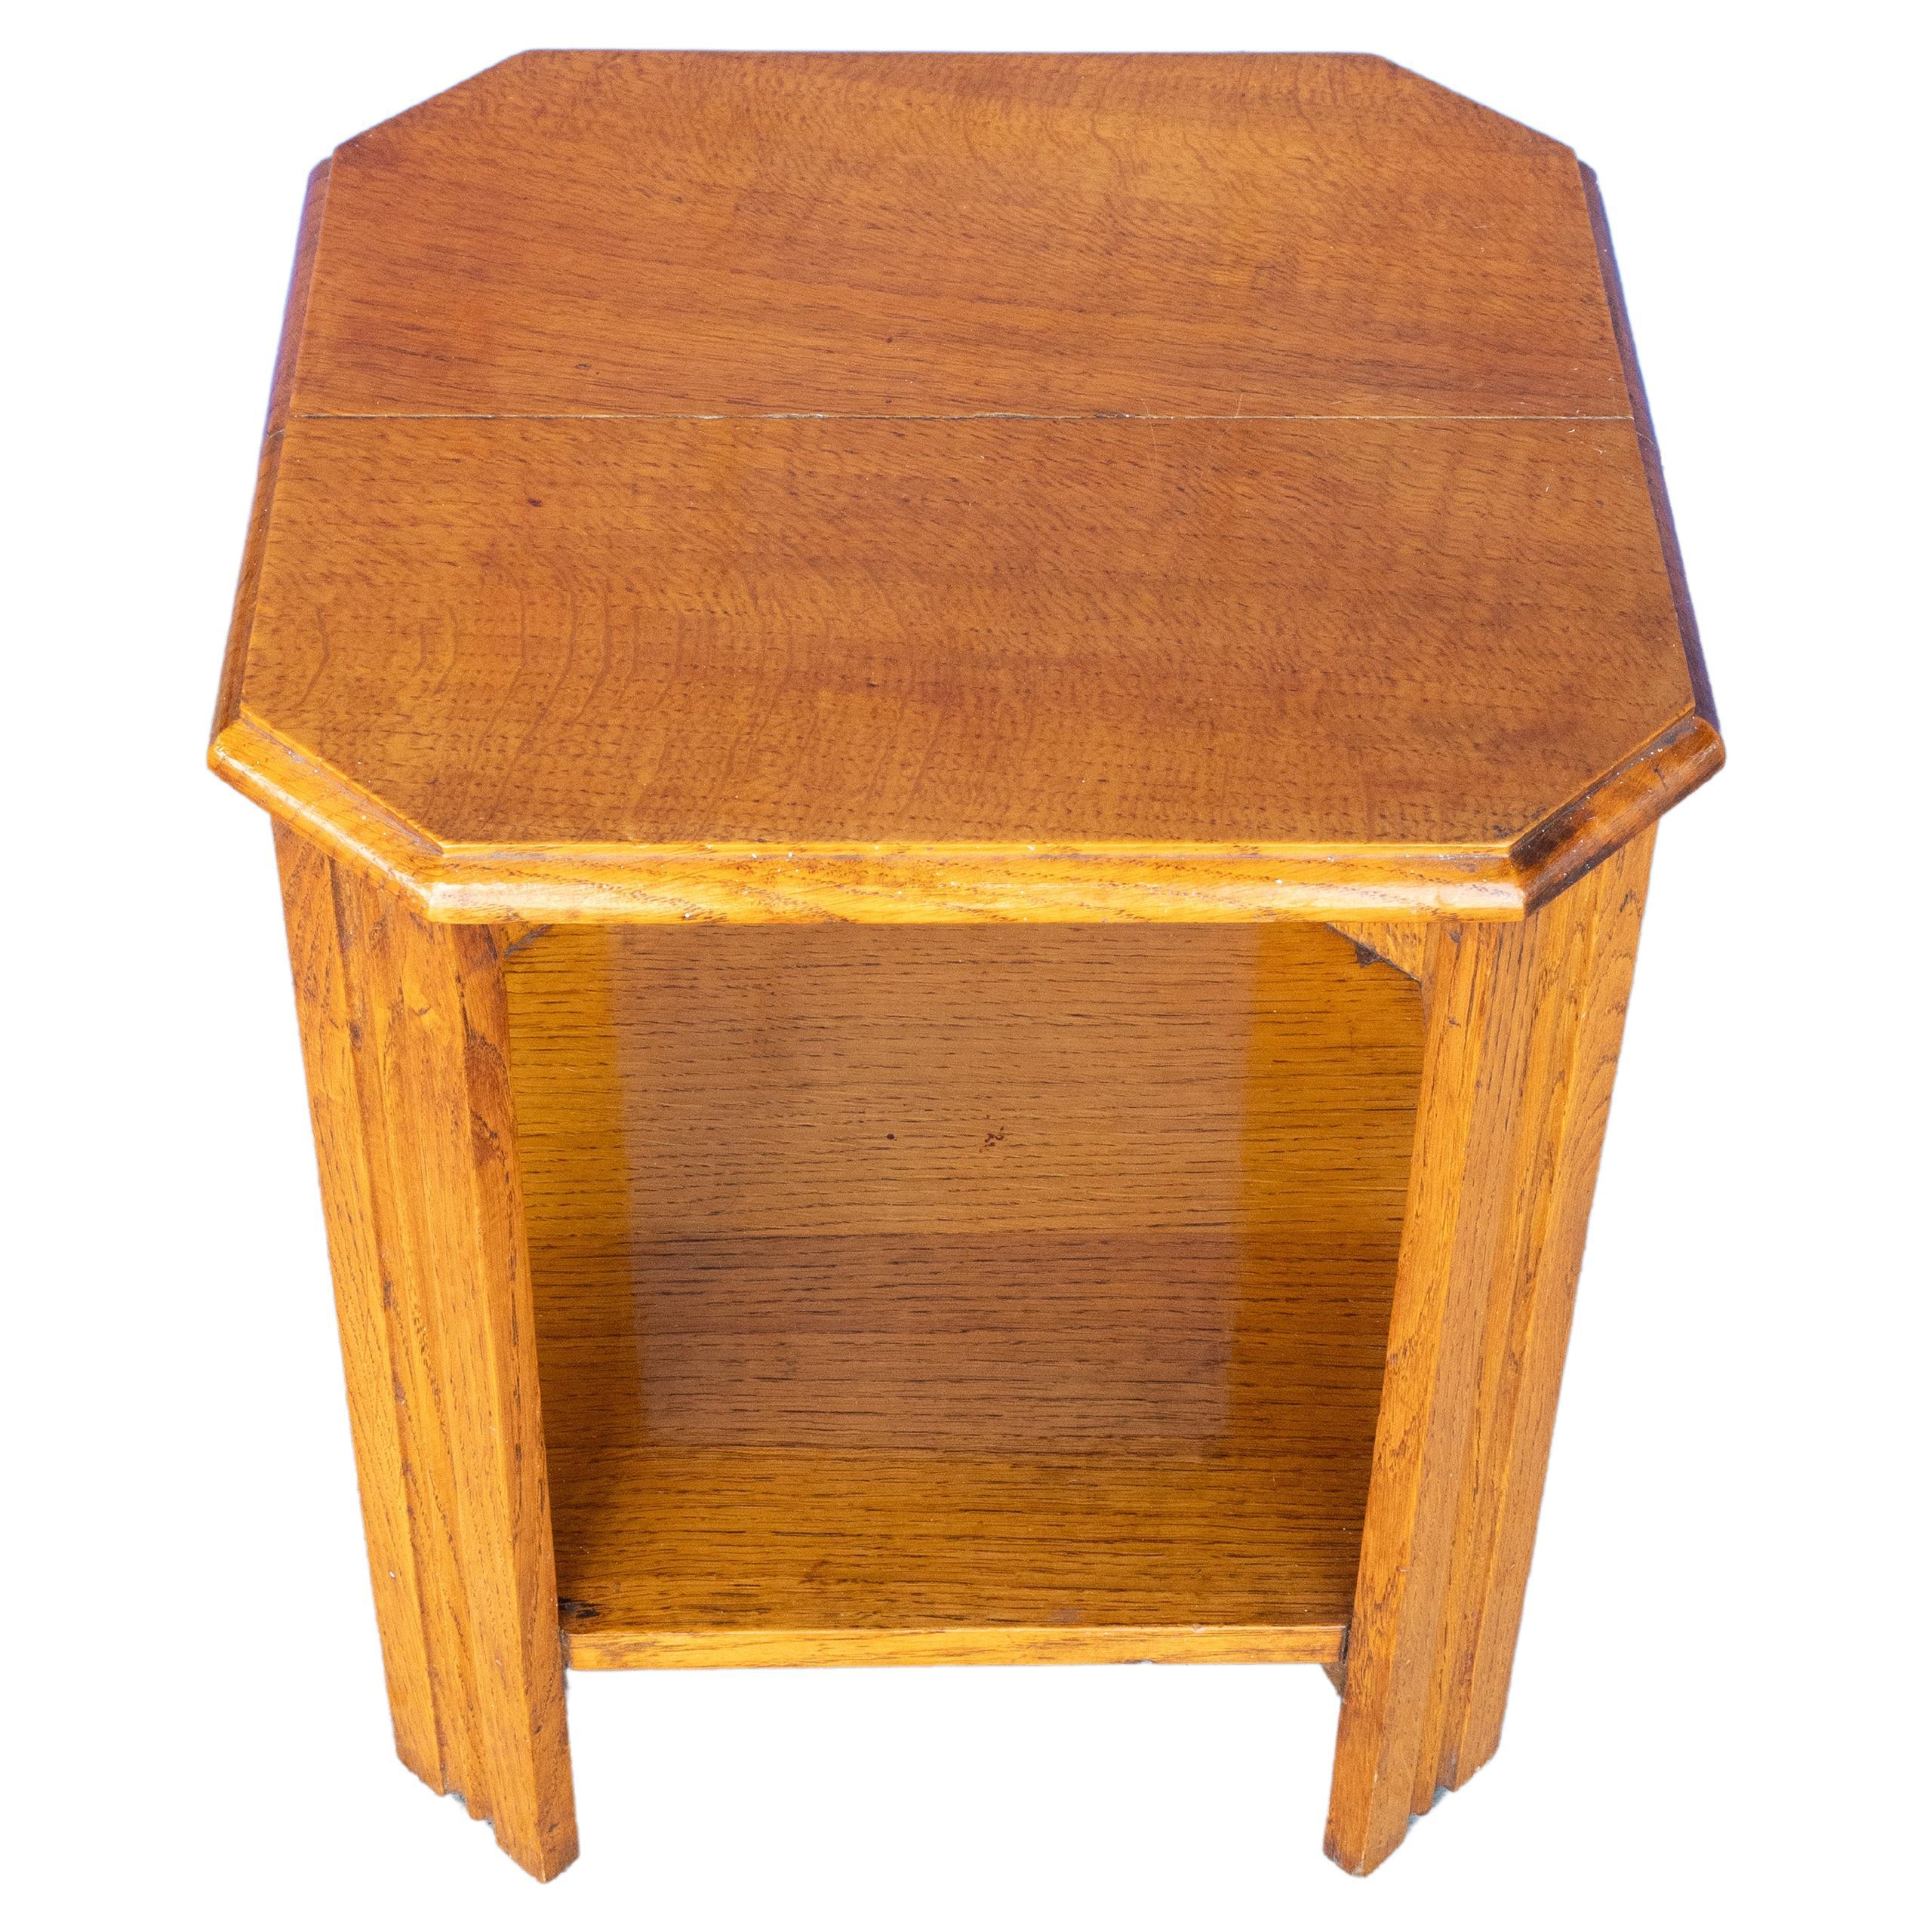 English Art Deco Oak Two-Tier Side Table, Heal & Son, London
C.1930
In good condition commensurate of age (please refer to photos)
